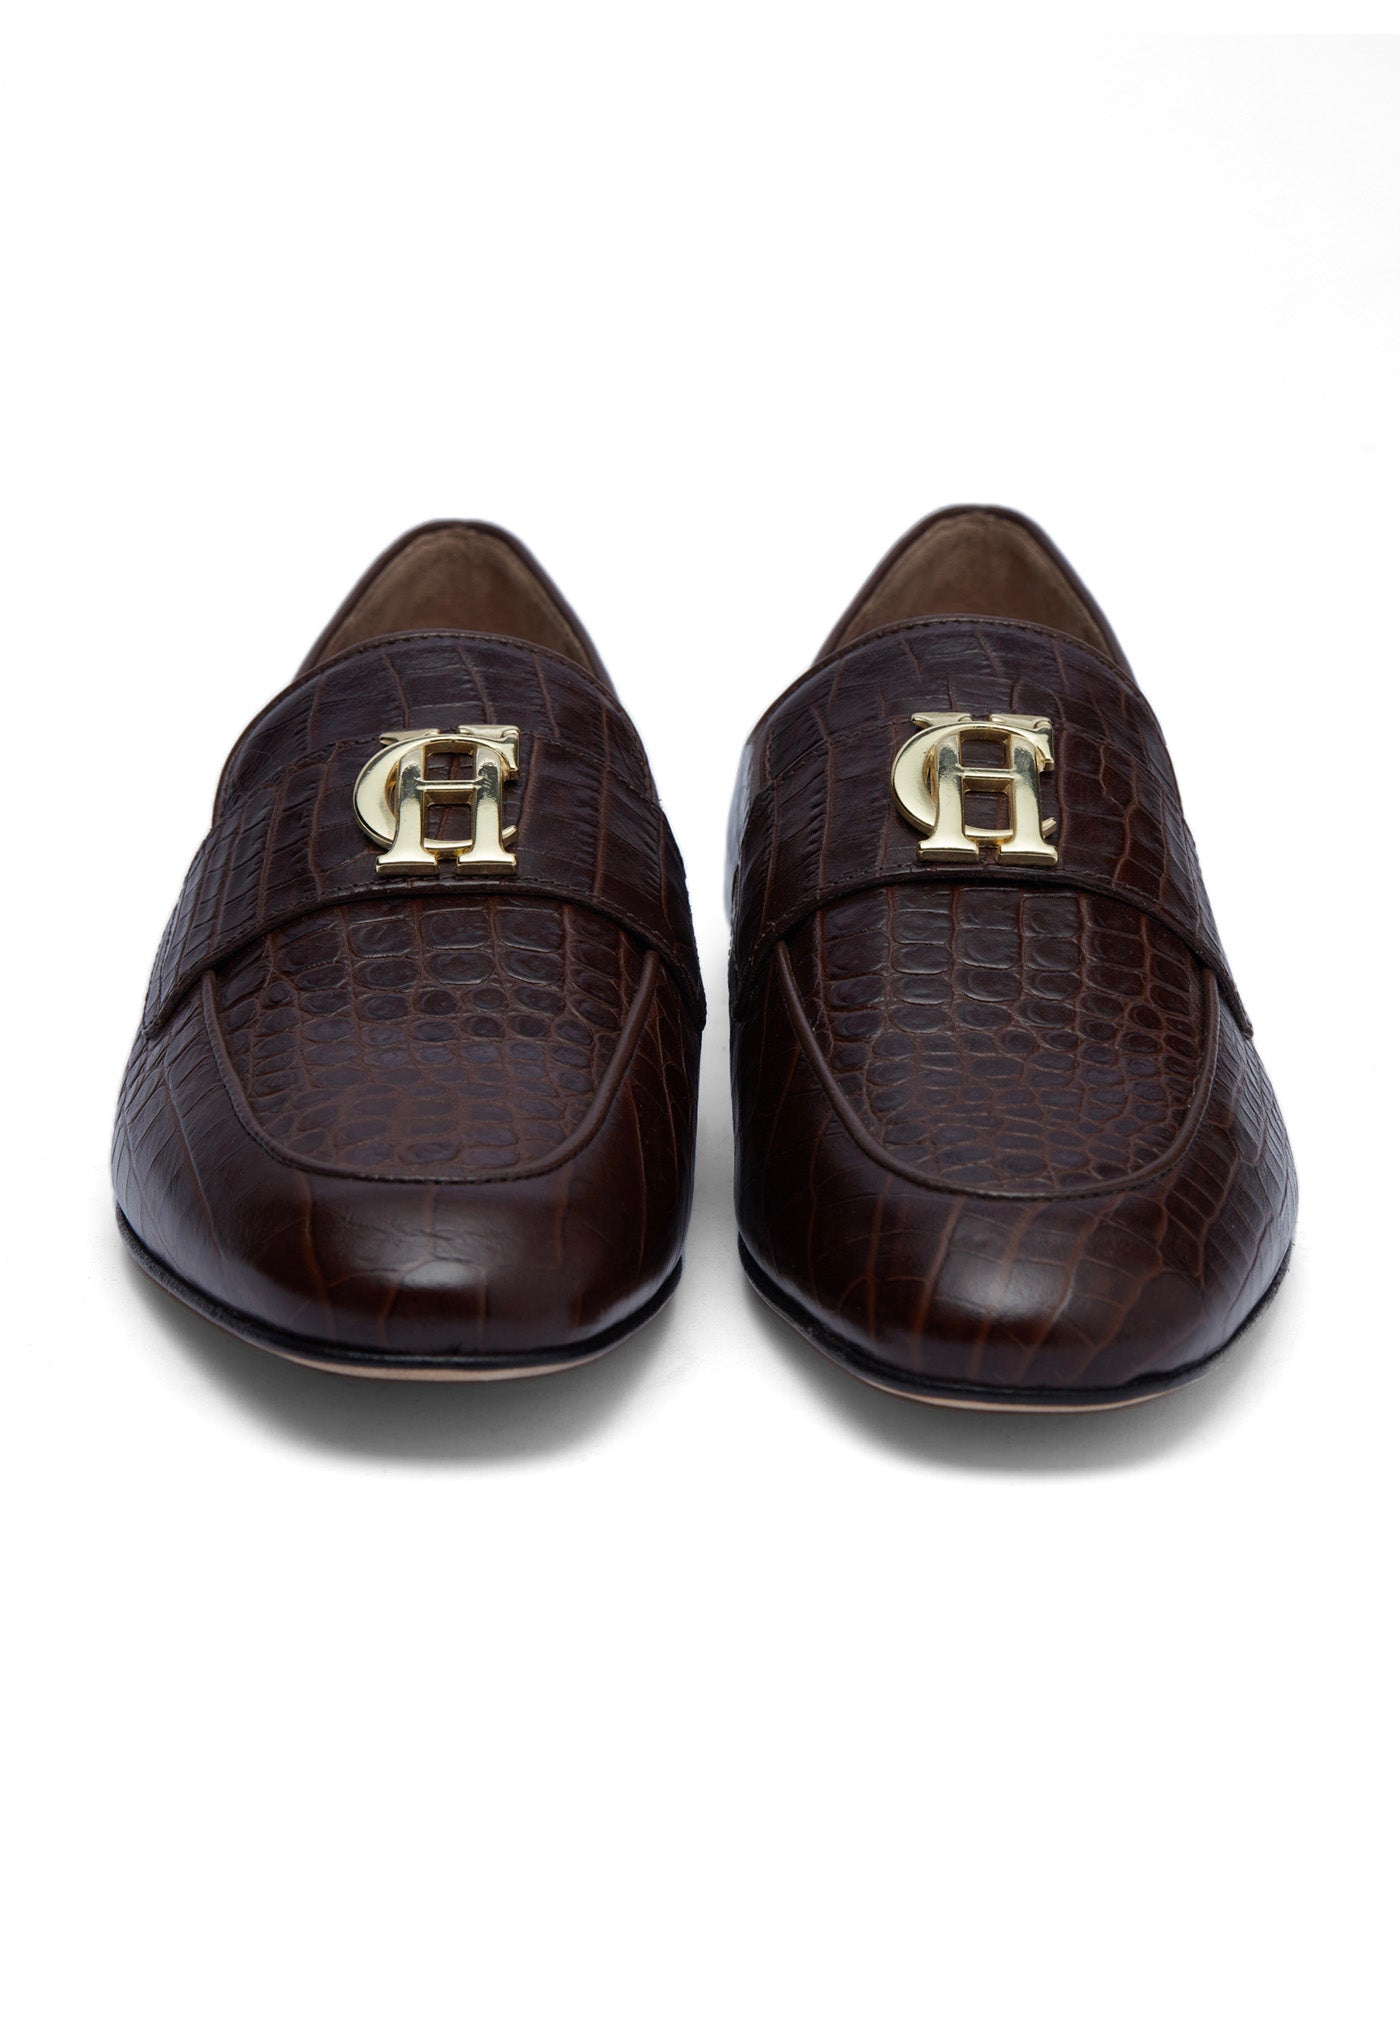 Harvard Loafer - Chocolate Croc sold by Angel Divine